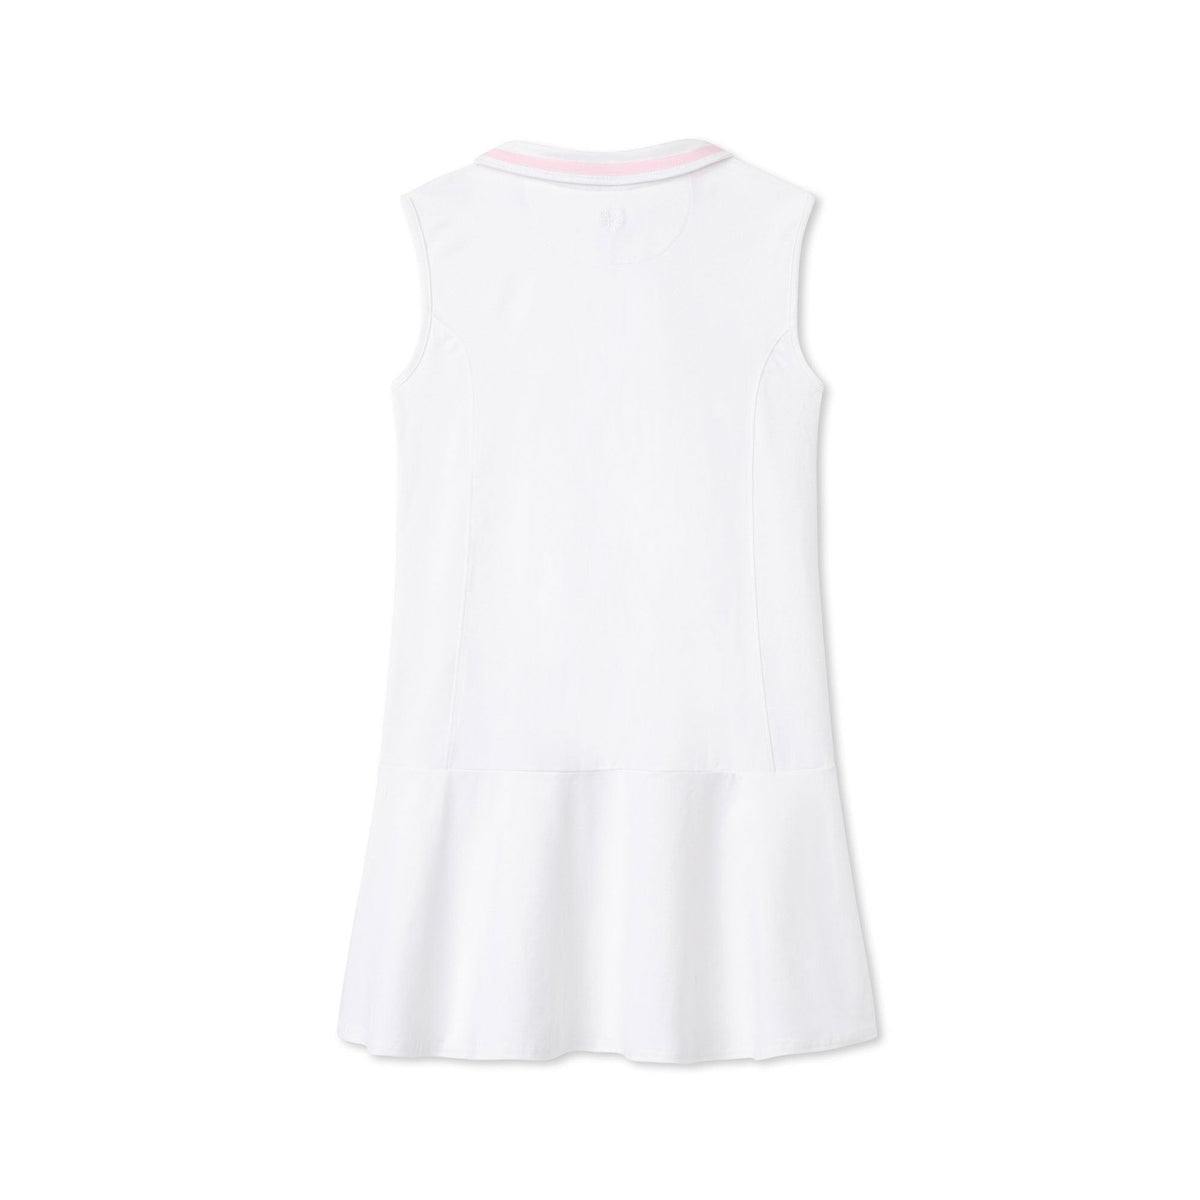 Classic and Preppy Vivian Tennis Performance Sherbet Dress, Bright White-Dresses, Jumpsuits and Rompers-CPC - Classic Prep Childrenswear